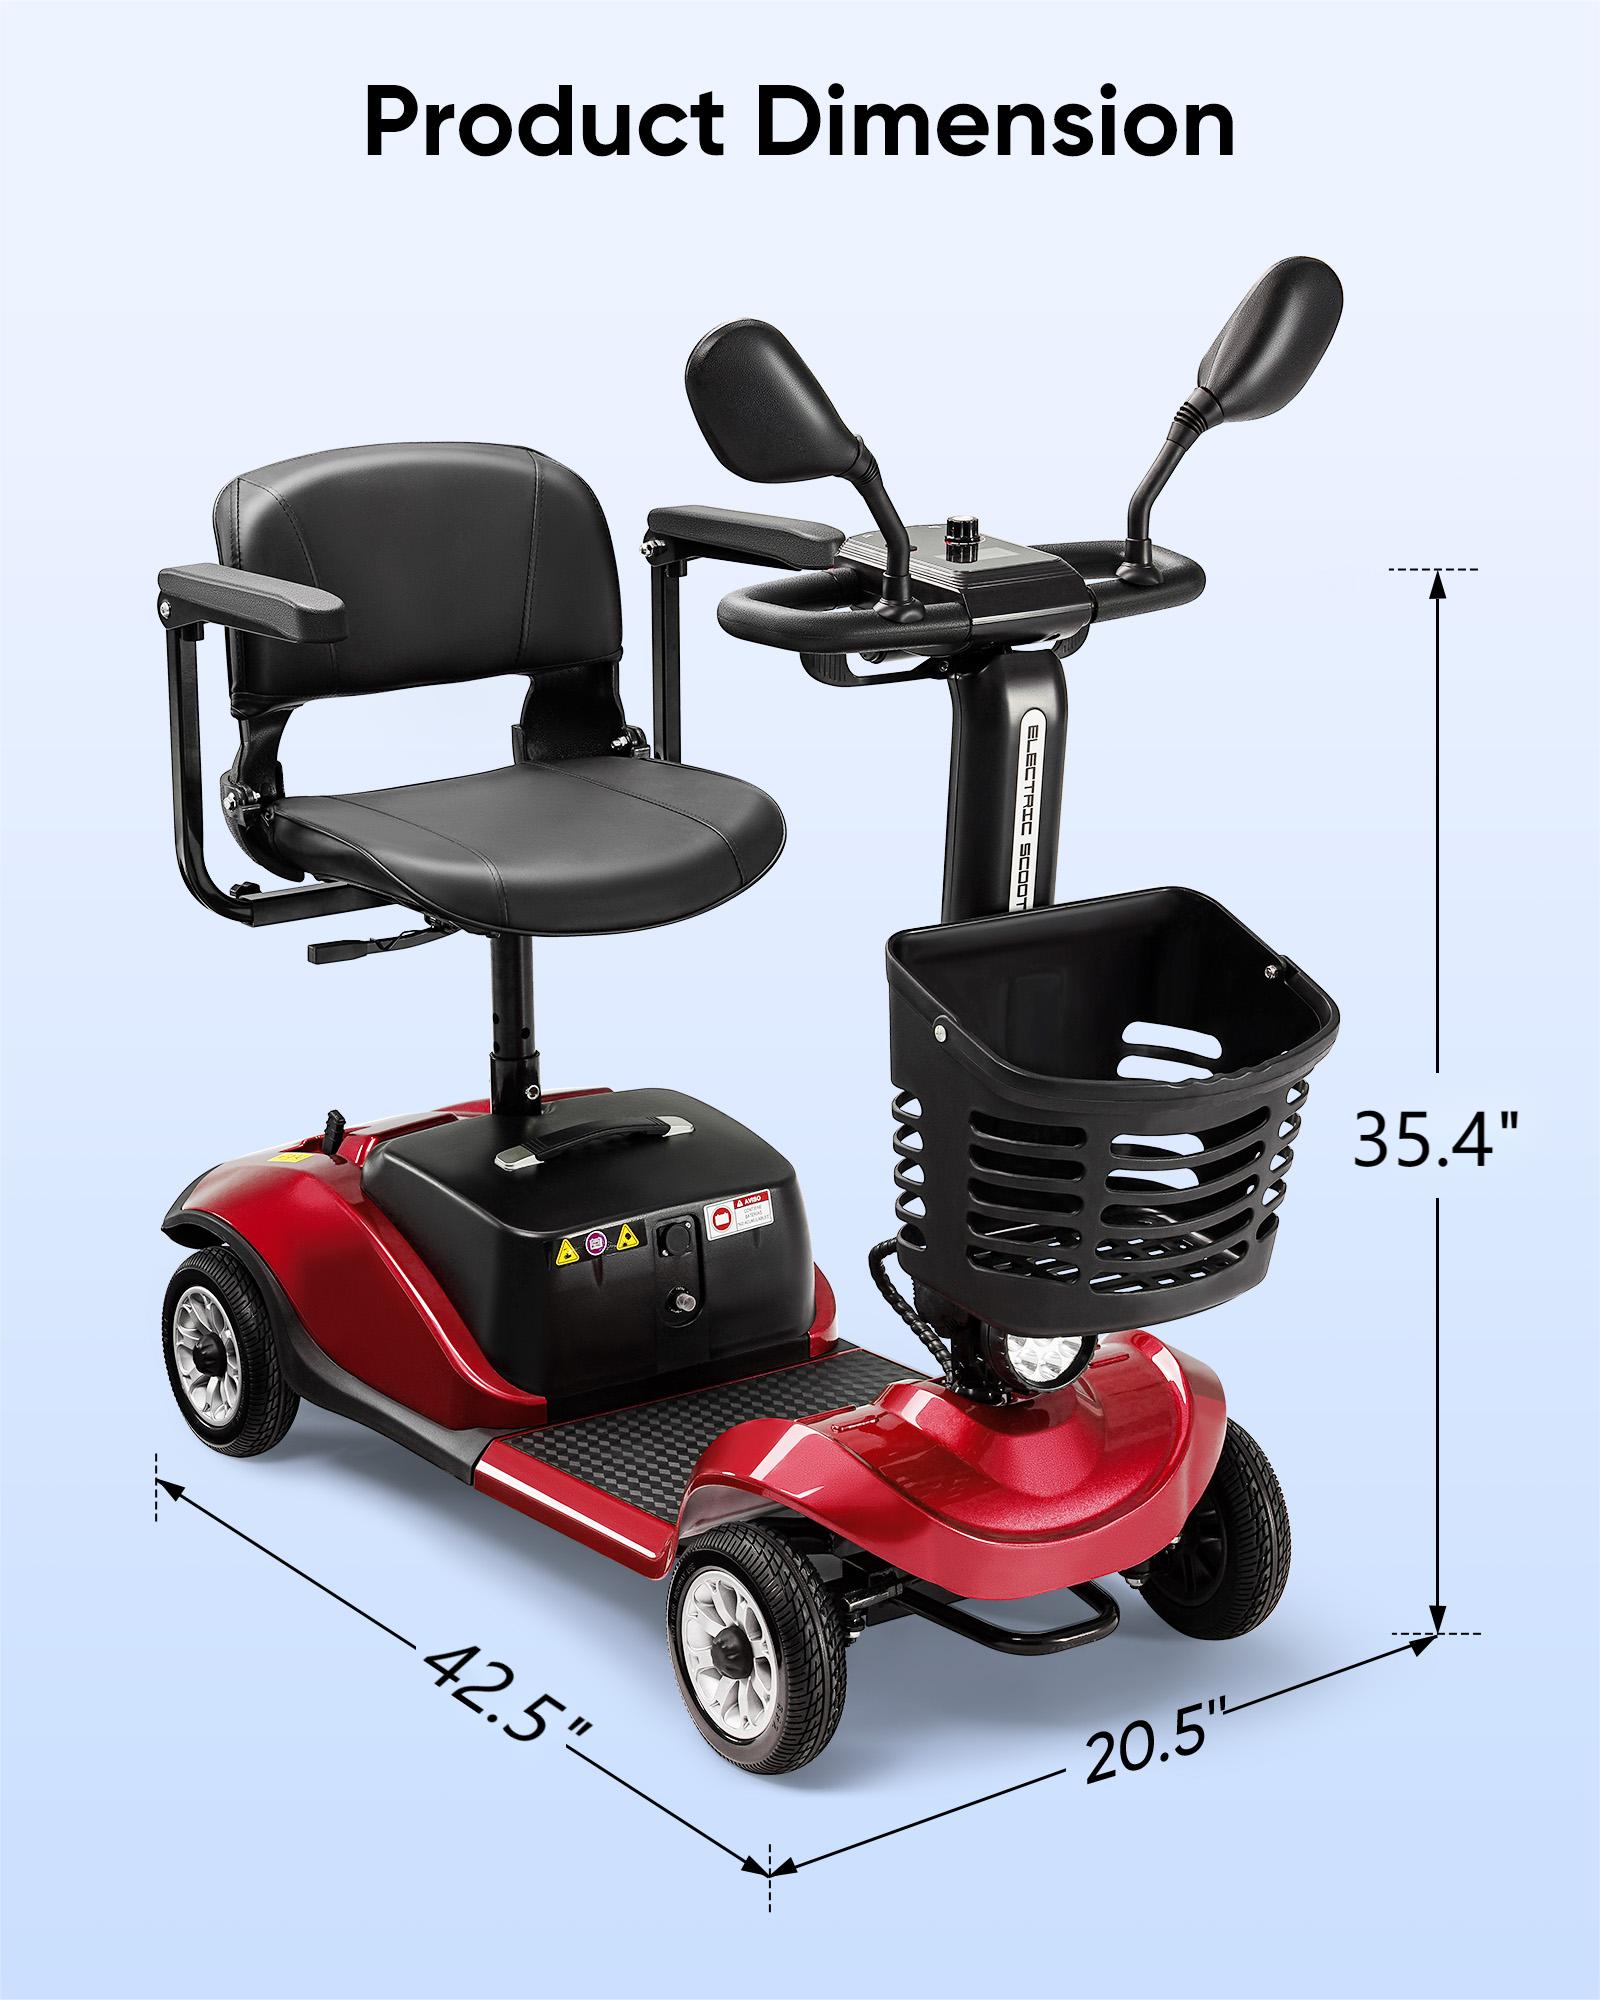 4 Wheel Electric Folding Travel Mobility Scooter with Basket and Extended Battery